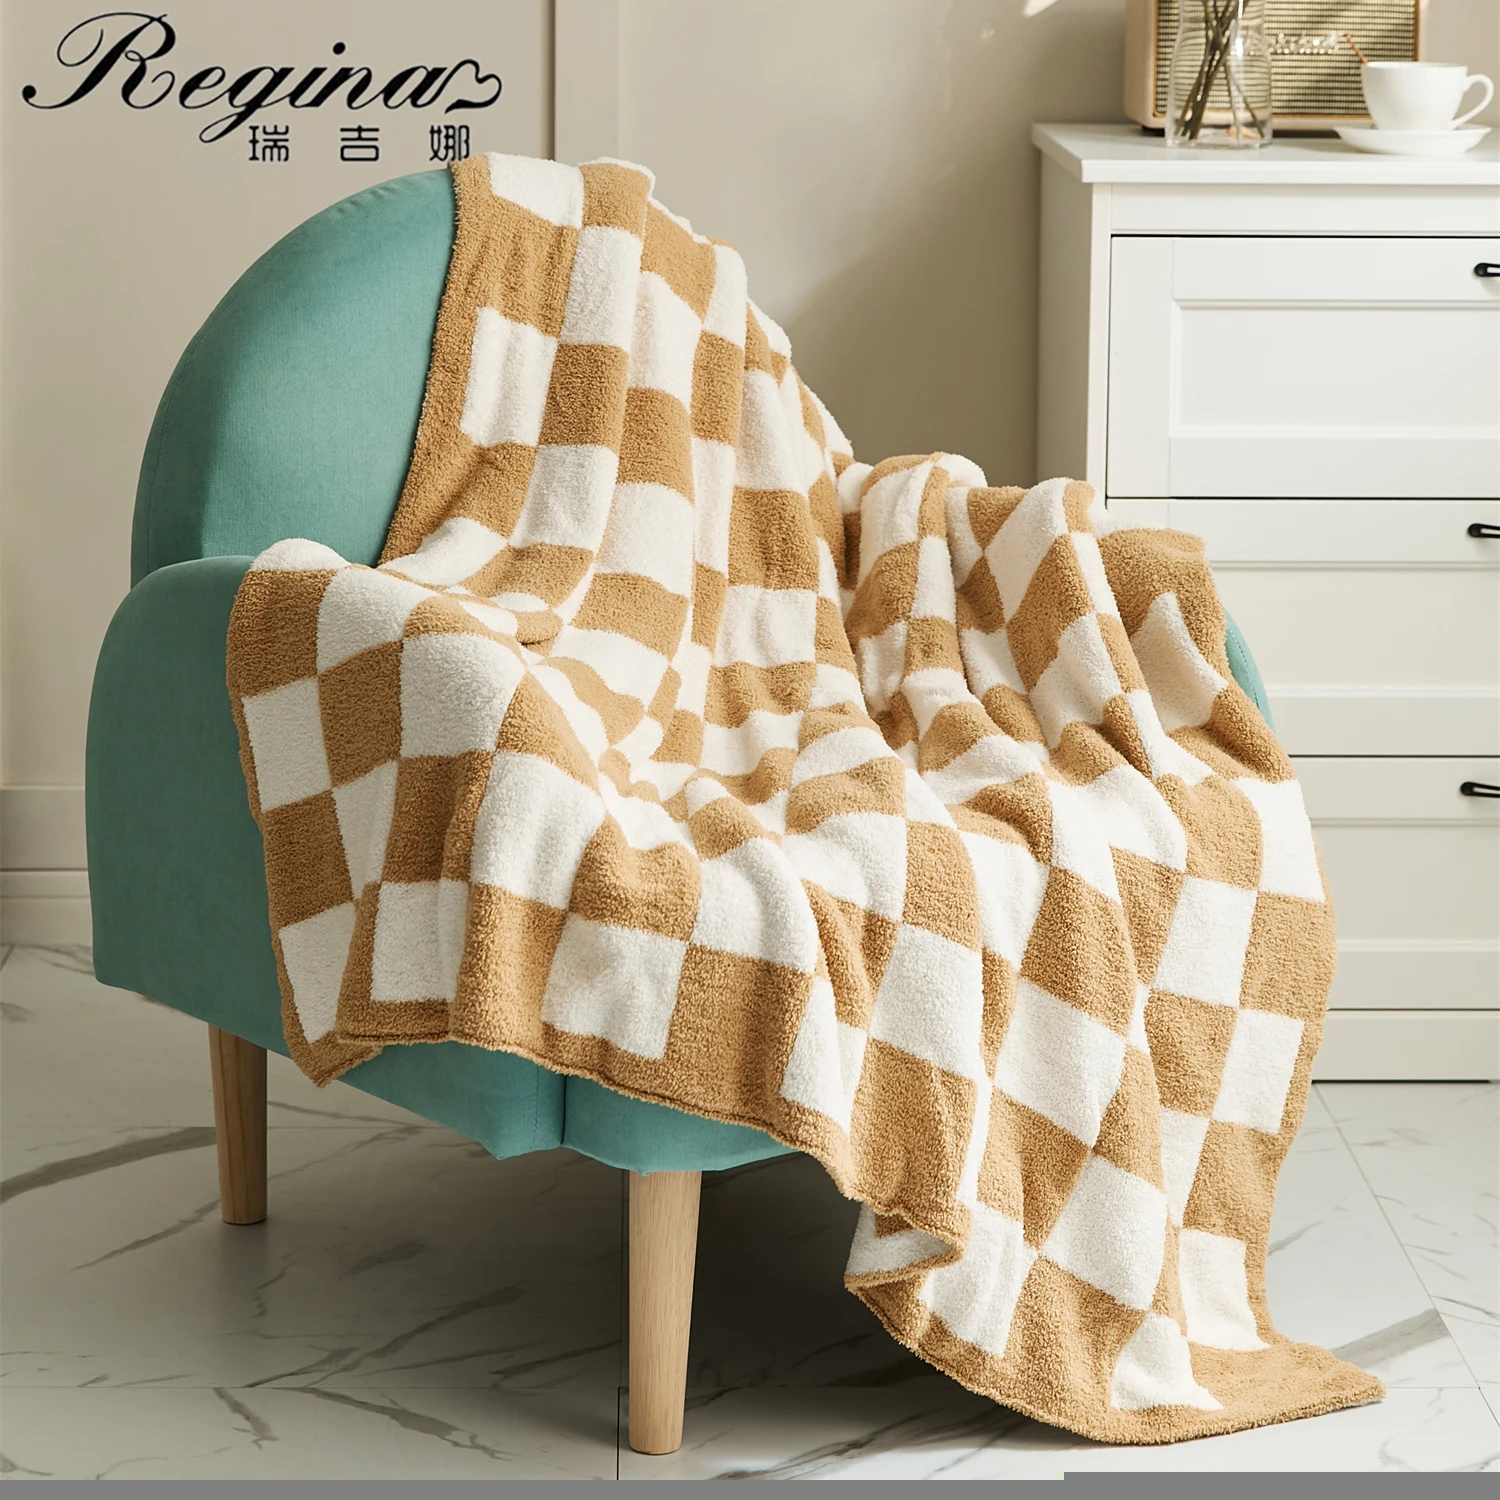 

REGINA Brand Downy Checkerboard Plaid Blanket Fluffy Soft Casual Sofa TV Throw Blanket Room Decor Bed Bedspread Quilt Blankets